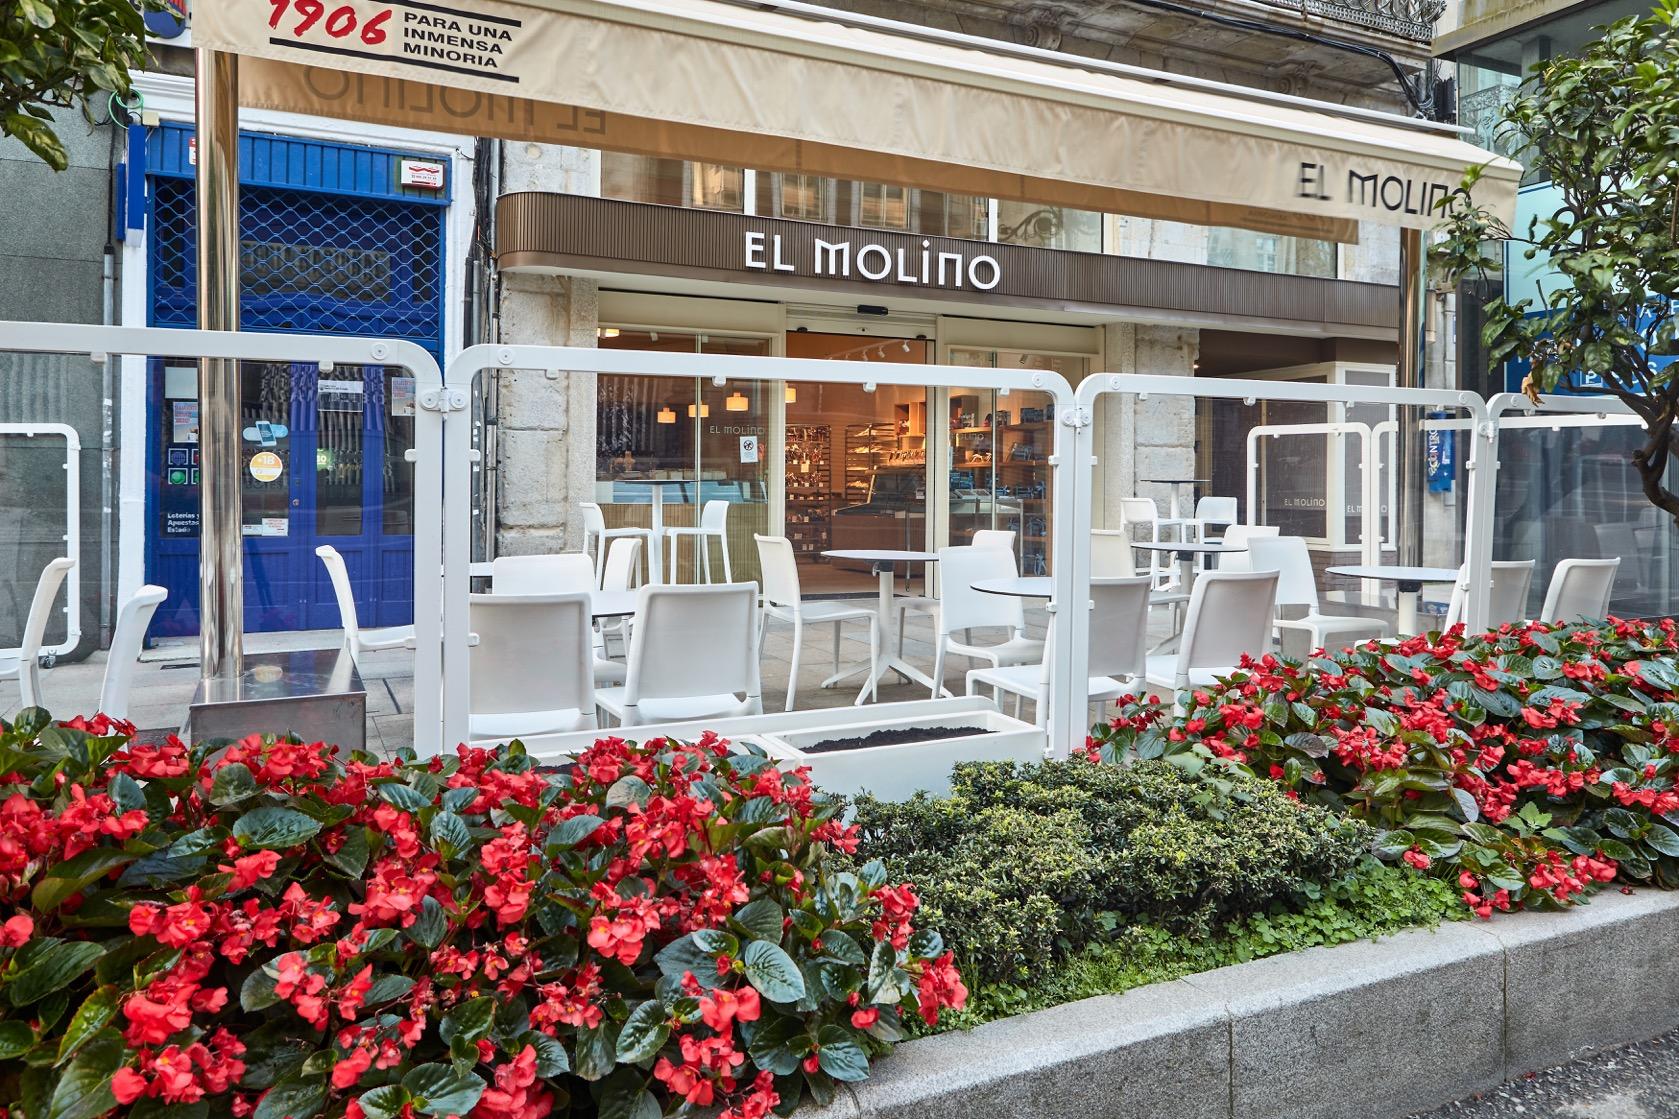 El Molino patisserie is situated at one end of this street, the perfect spot to enjoy some of the best sweets this olive-producing city has to offer.